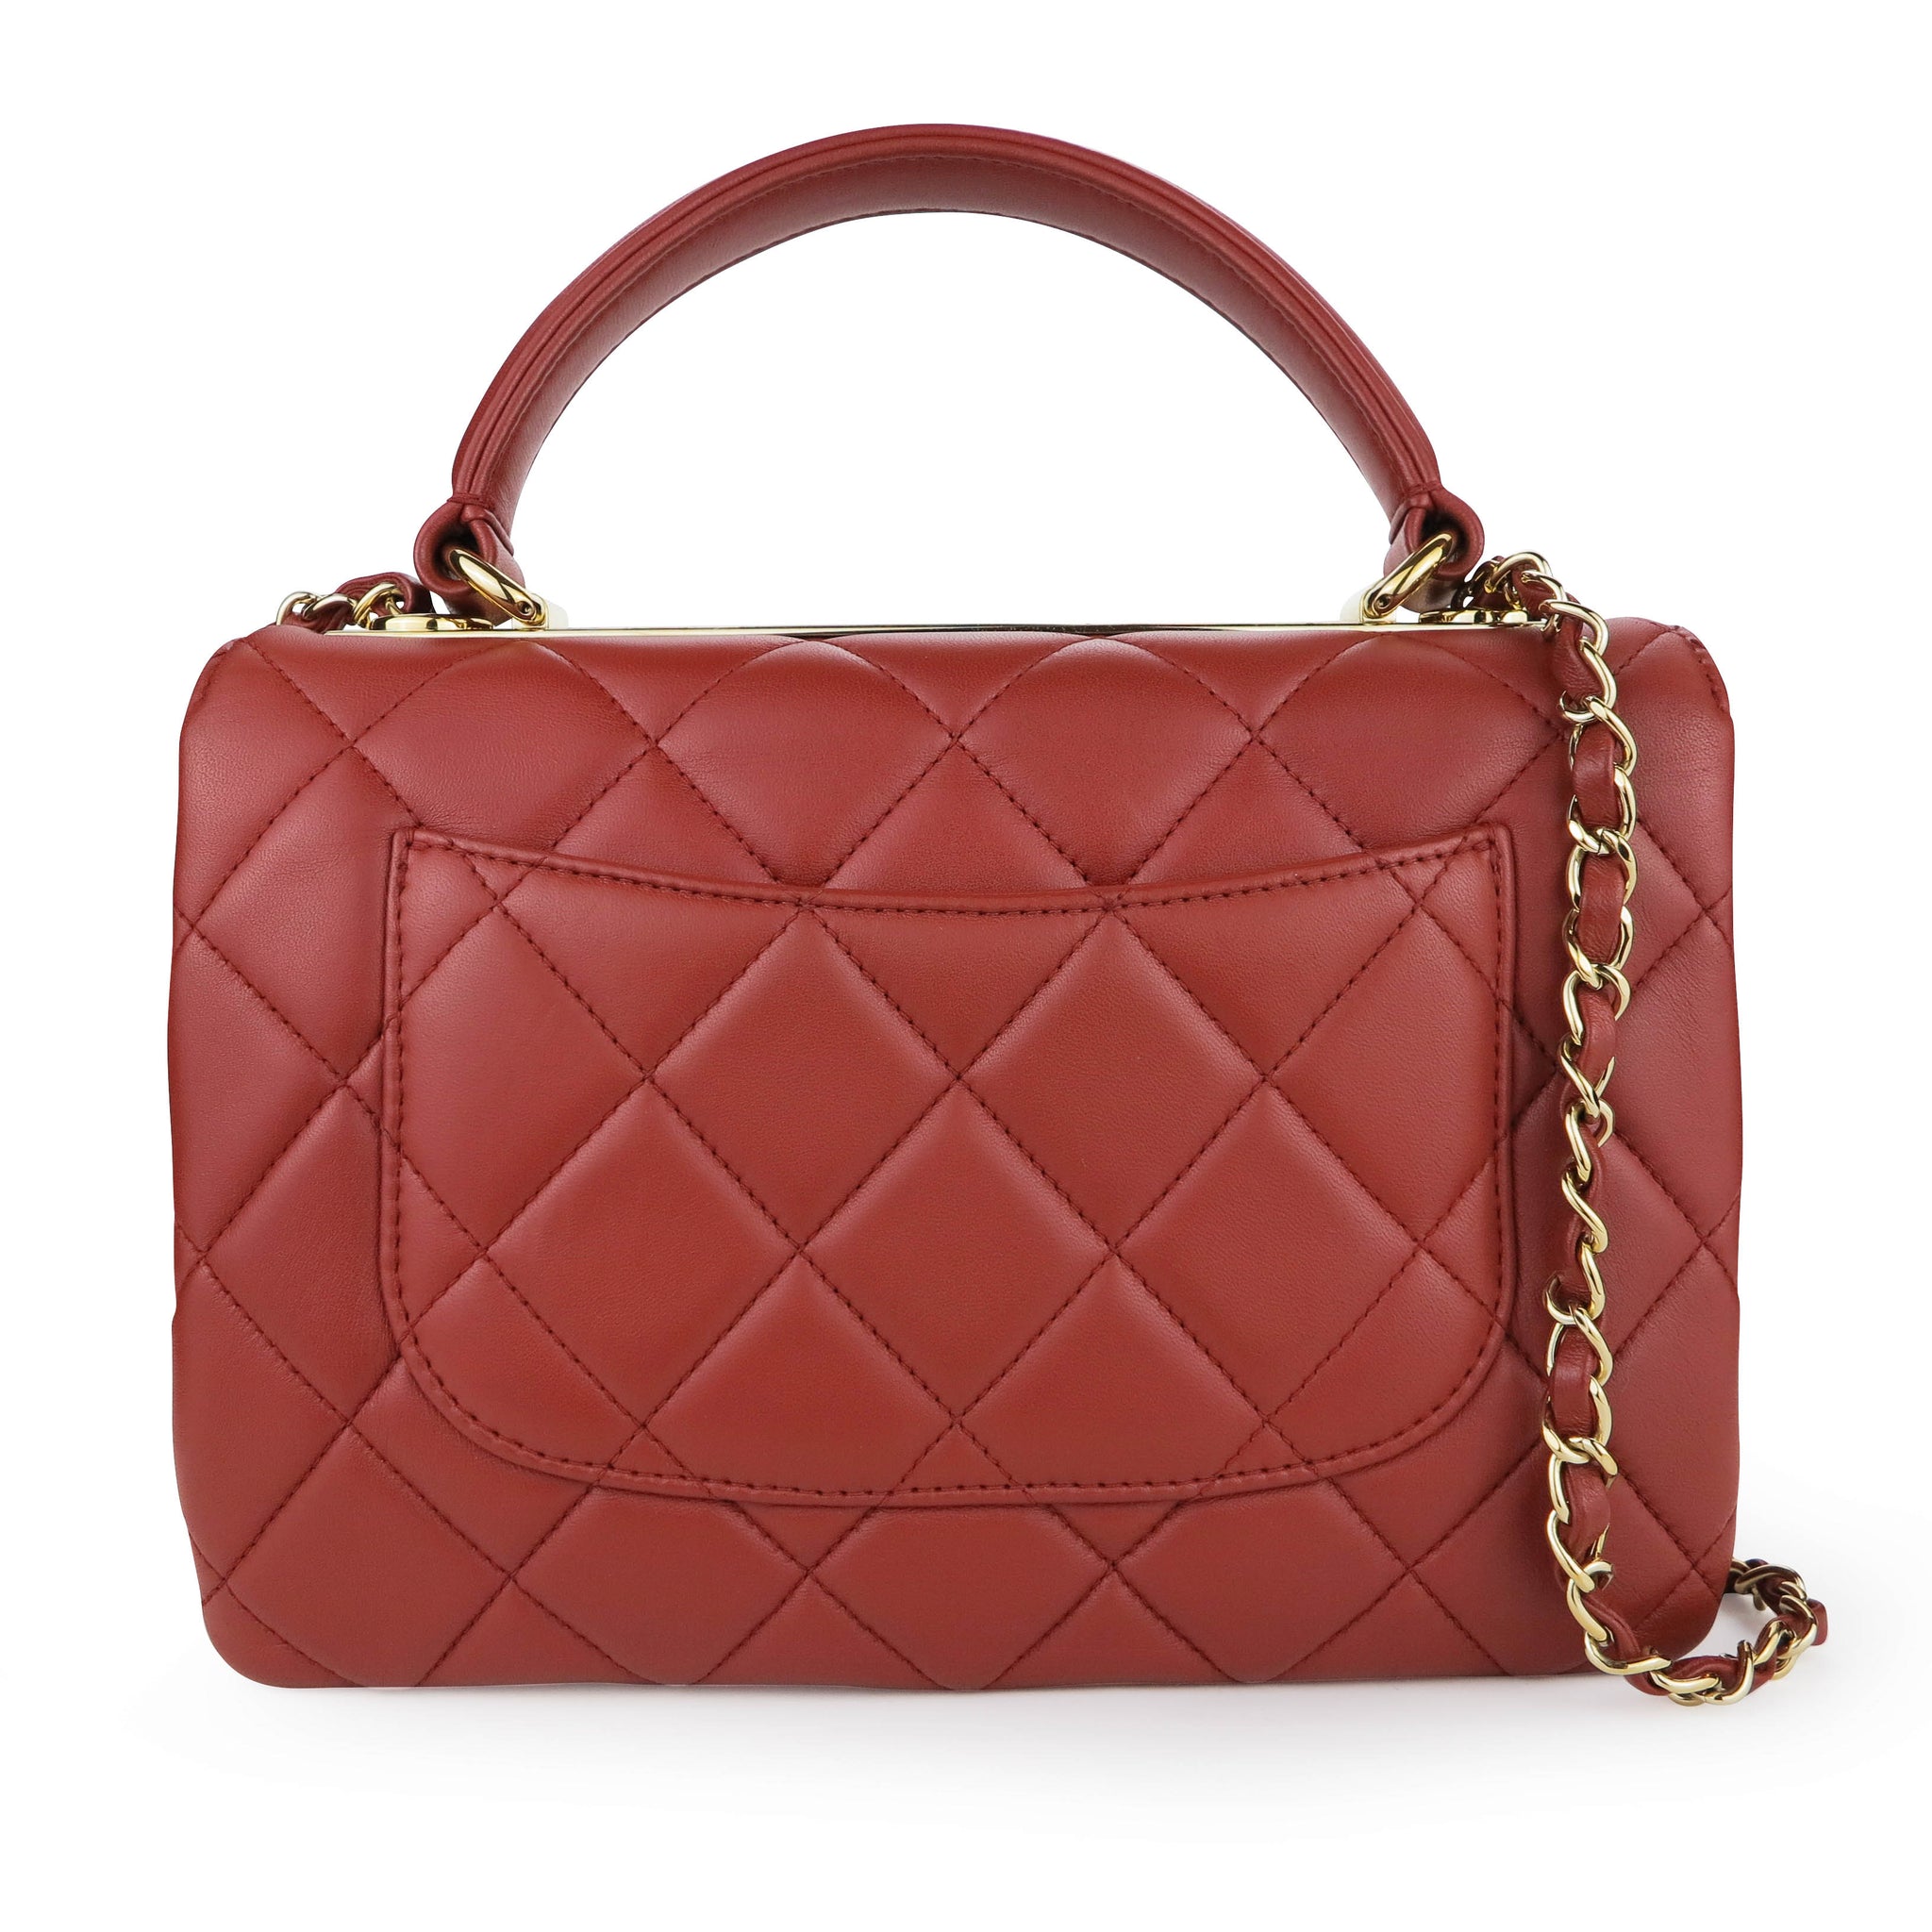 Tag et bad til bundet fast CHANEL Small Trendy CC Flap Bag with Top Handle in Red Lambskin | Dearluxe